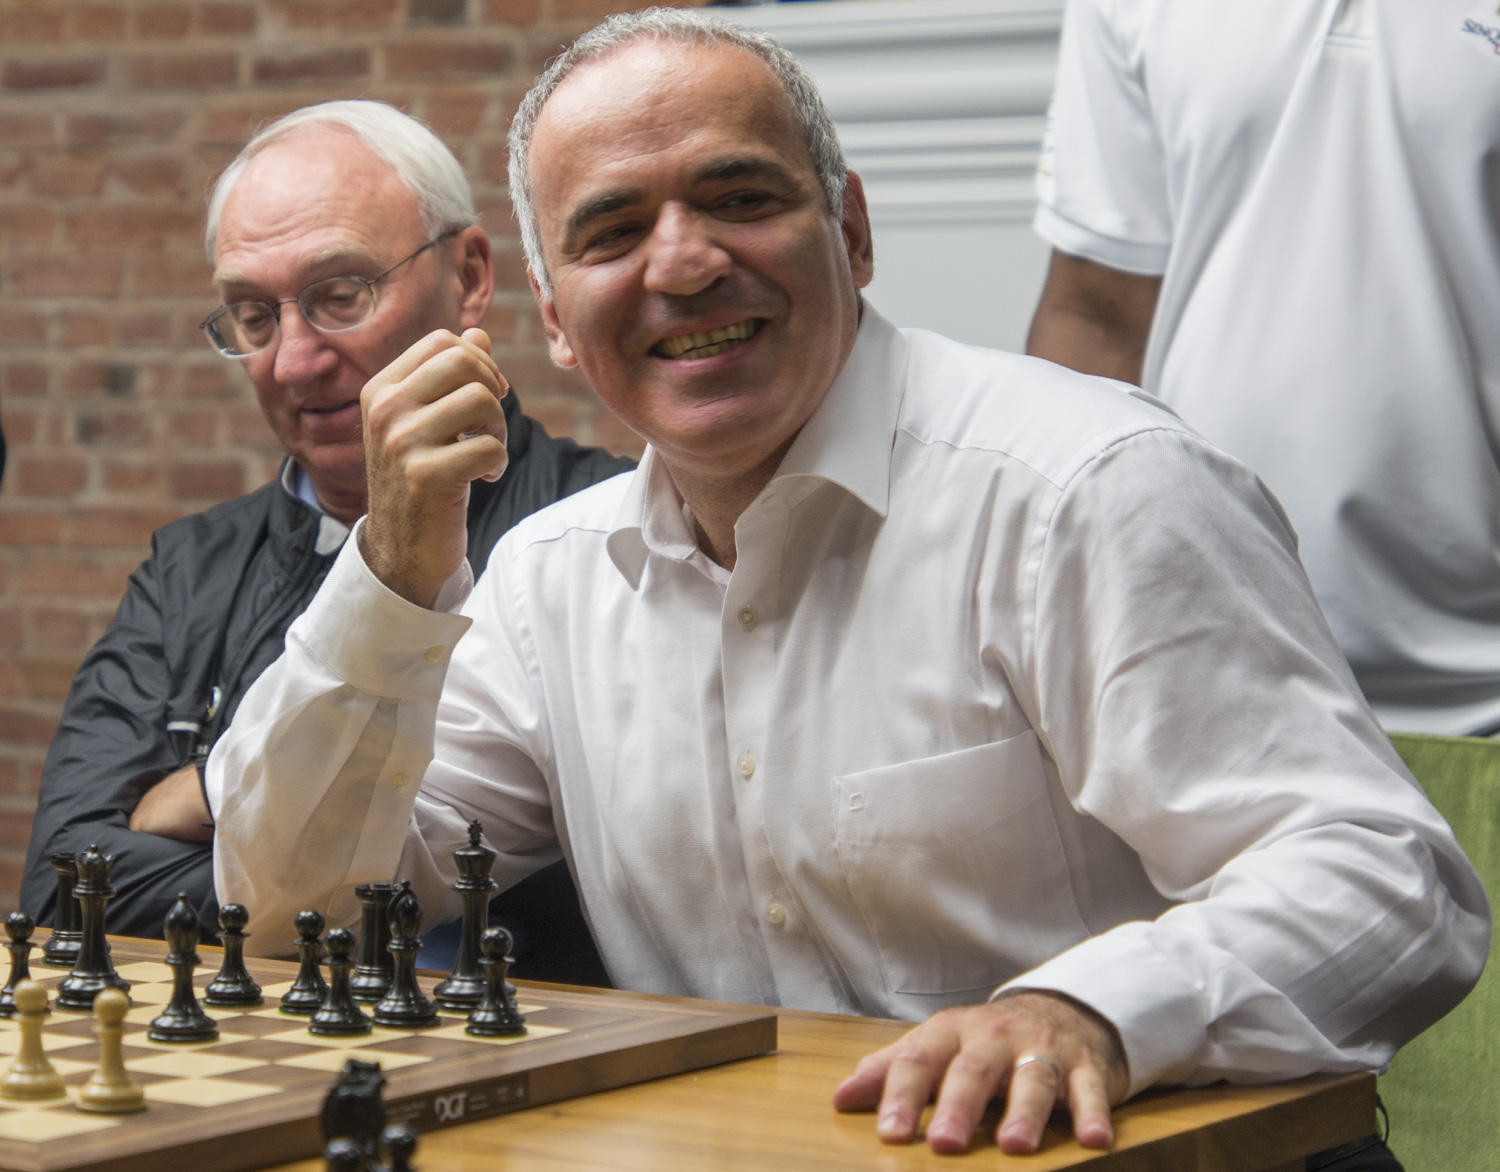 Kasparov returns to chess board, St. Louis for weekend match | Moves for Life Blog